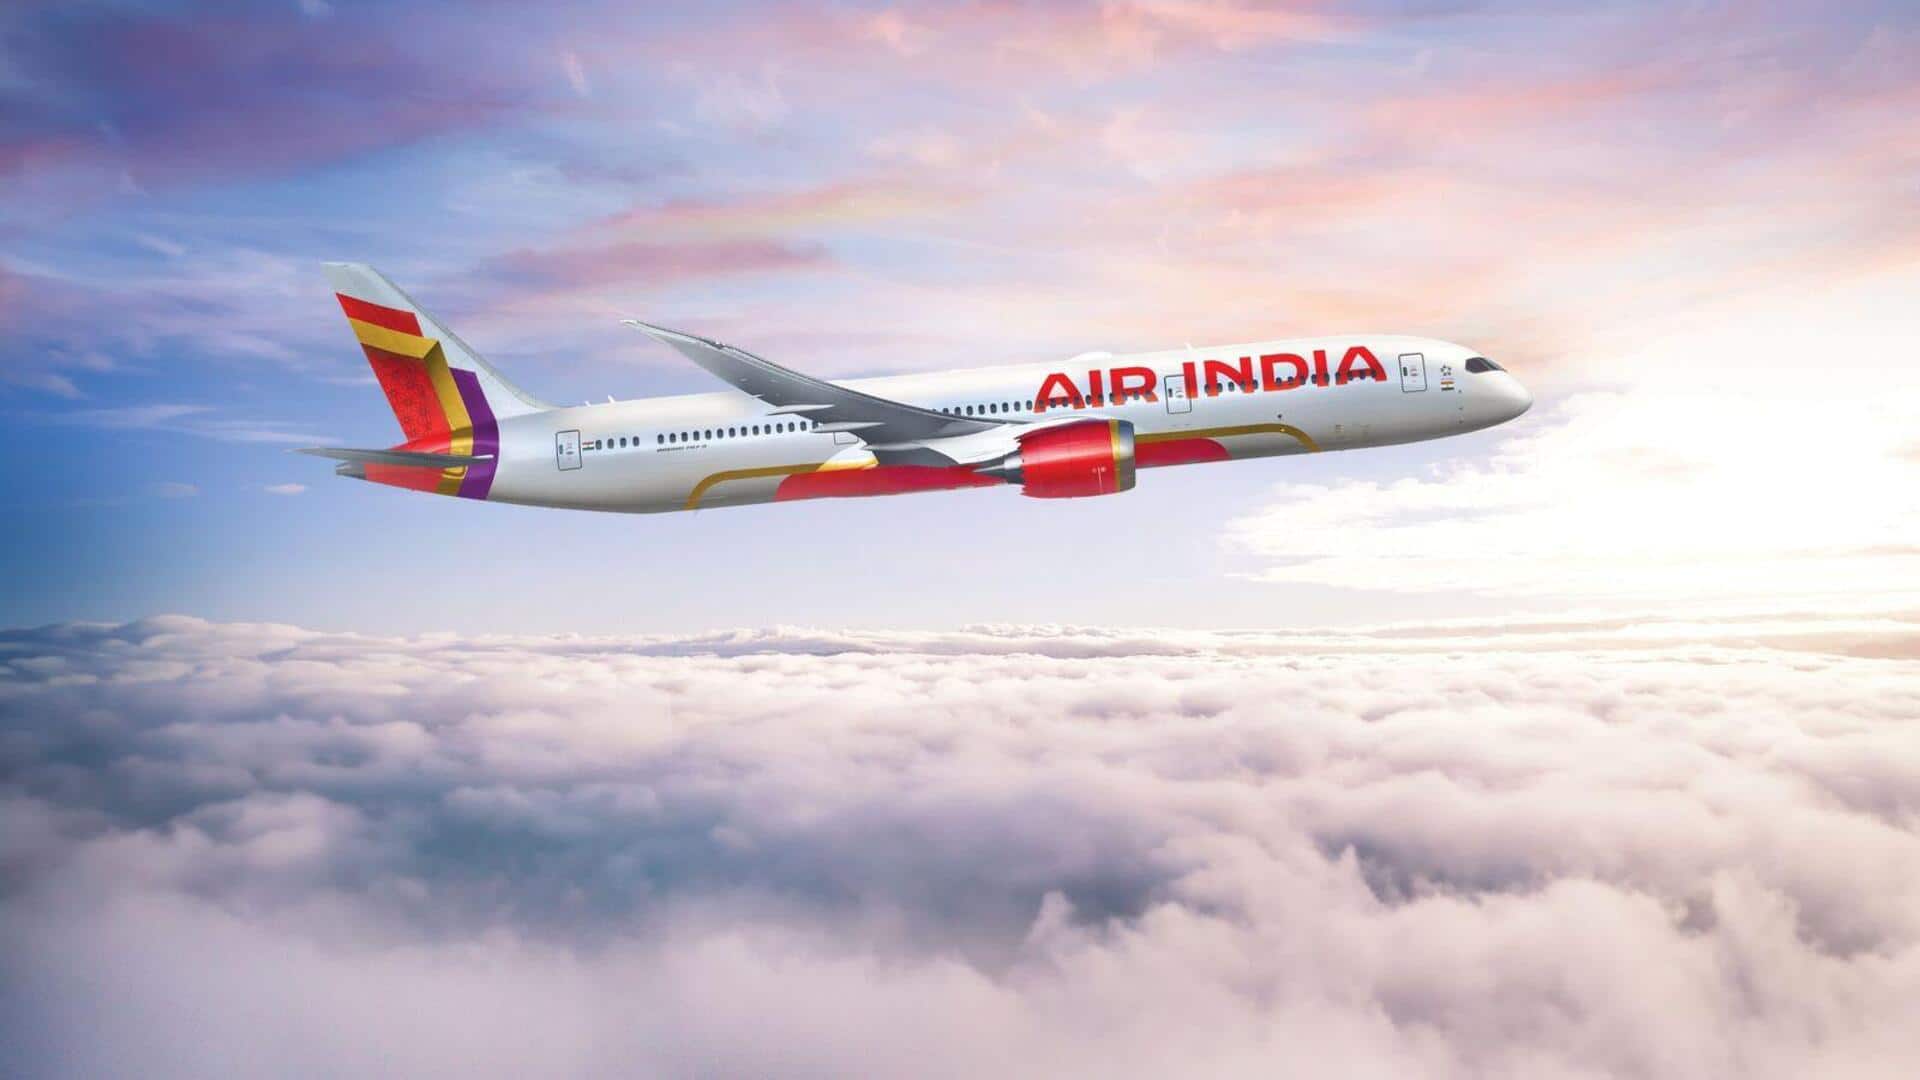 DGCA fines Air India Rs. 1.1cr for safety violations